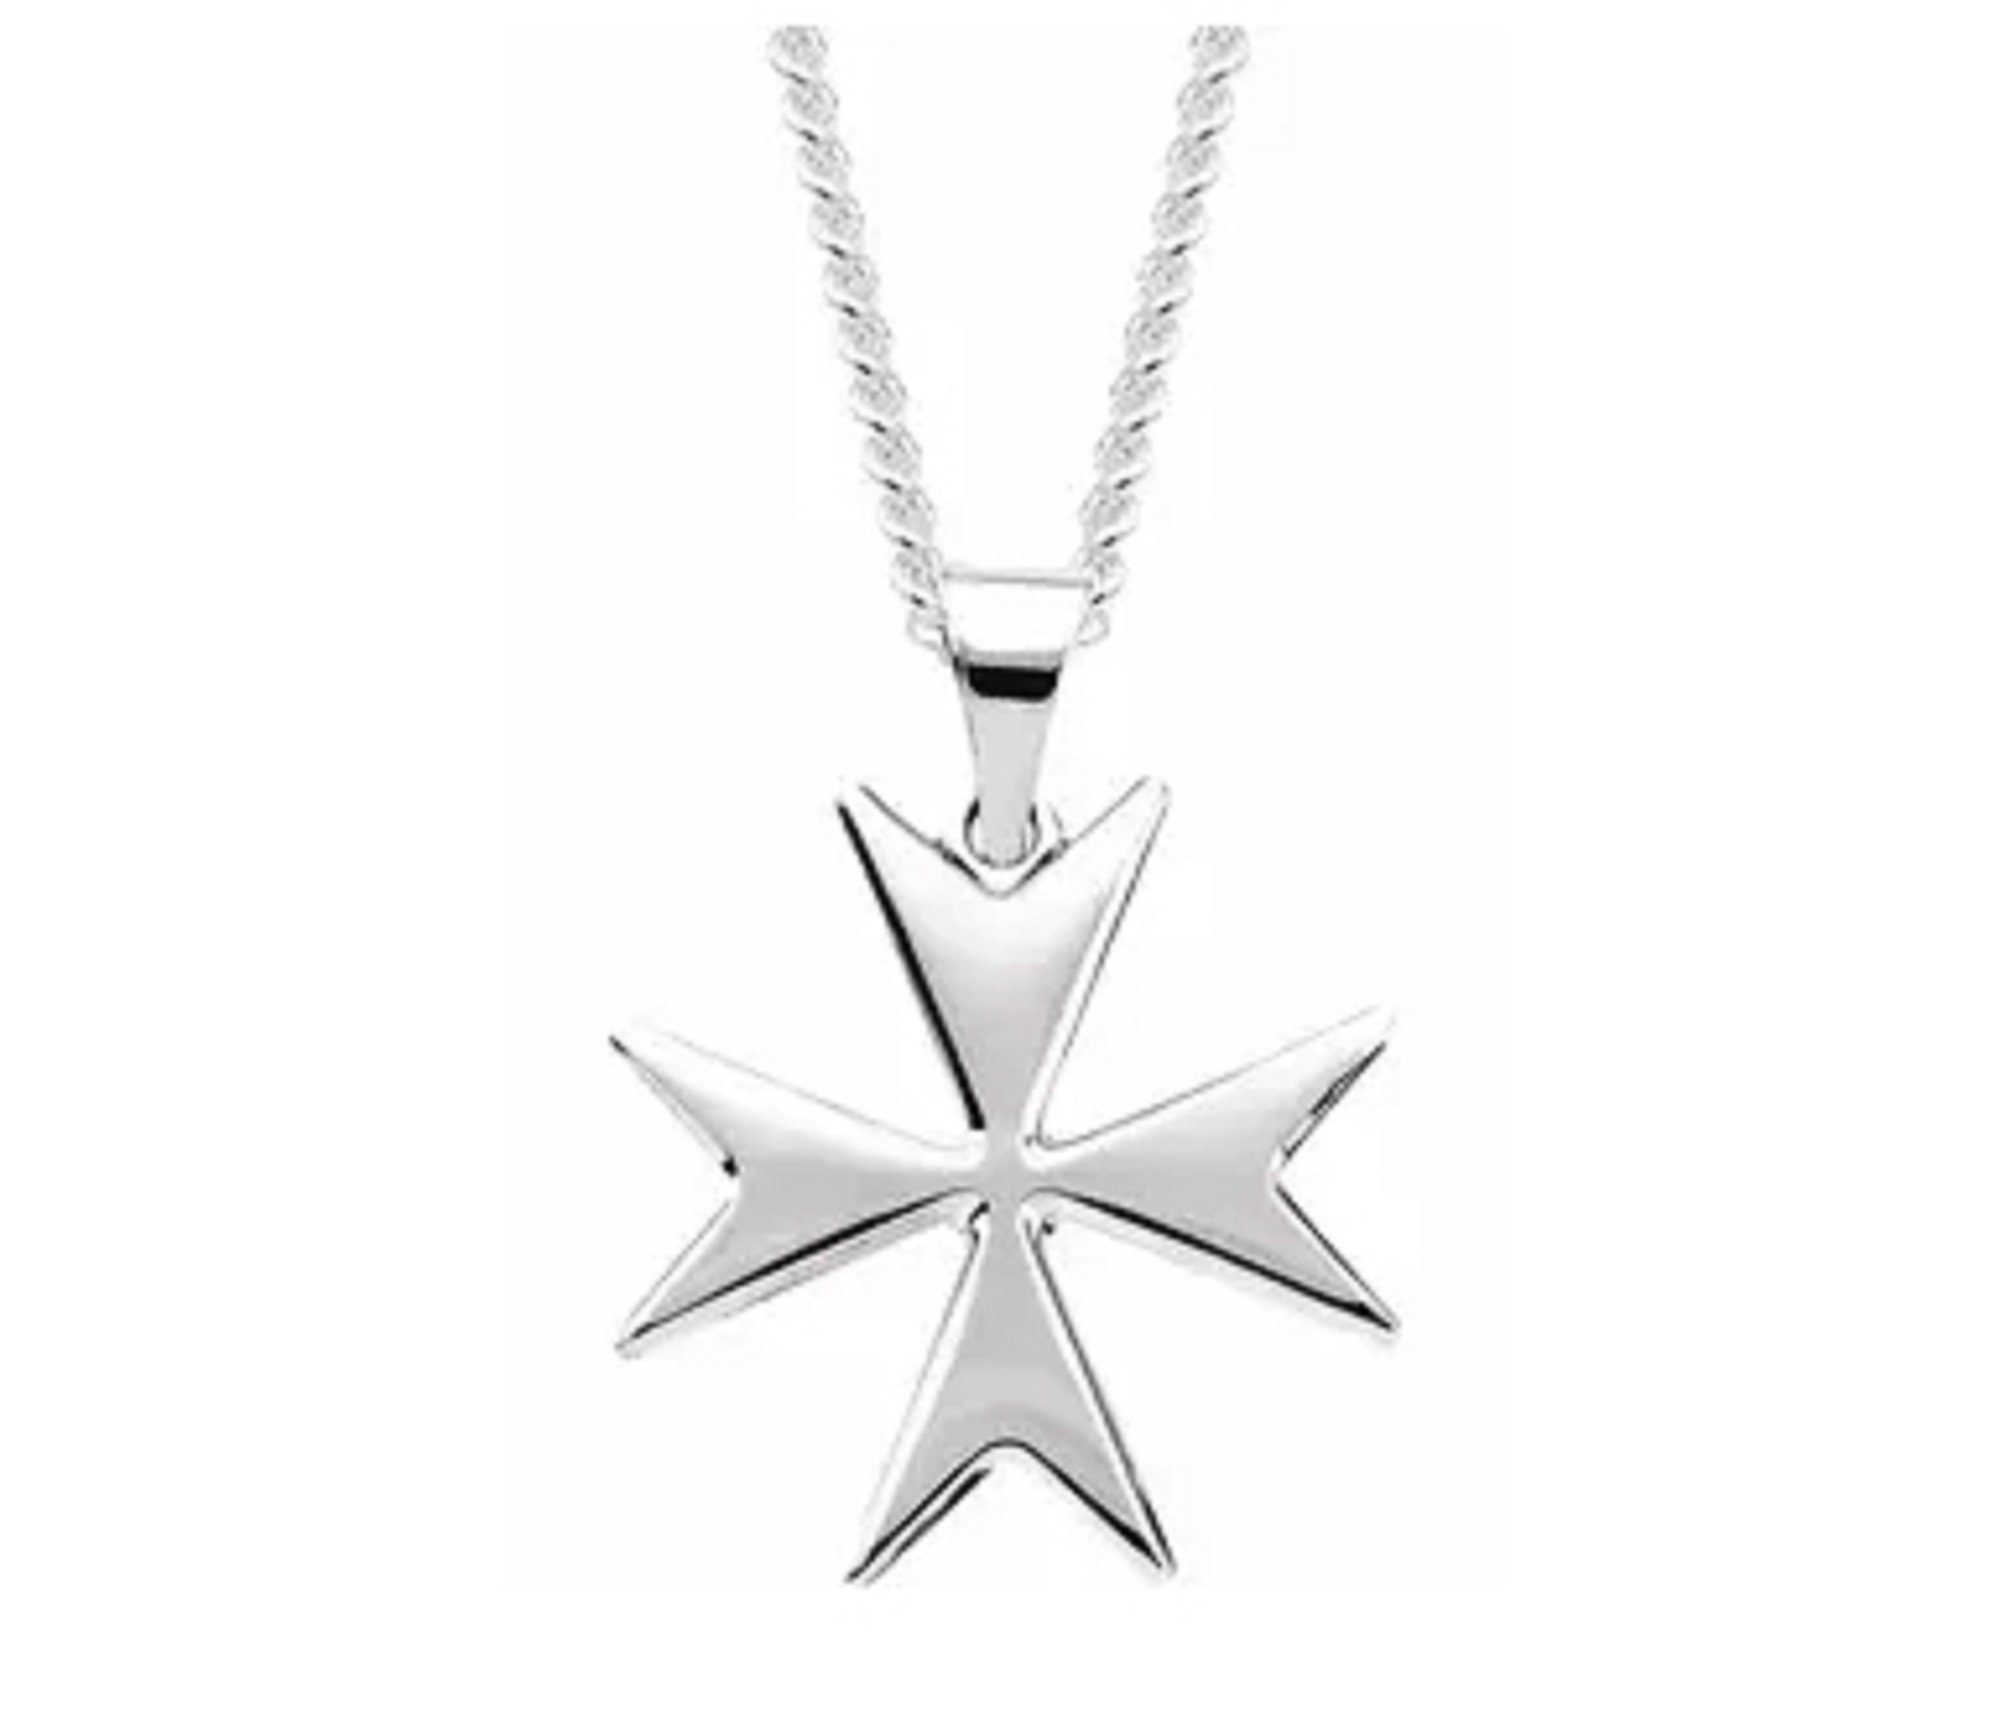 Mom Jewelry- Christian Jewelry For Her -Engagement Gift - Sterling Silver Maltese Cross 24 Necklace- Eliana & Eli Baptism